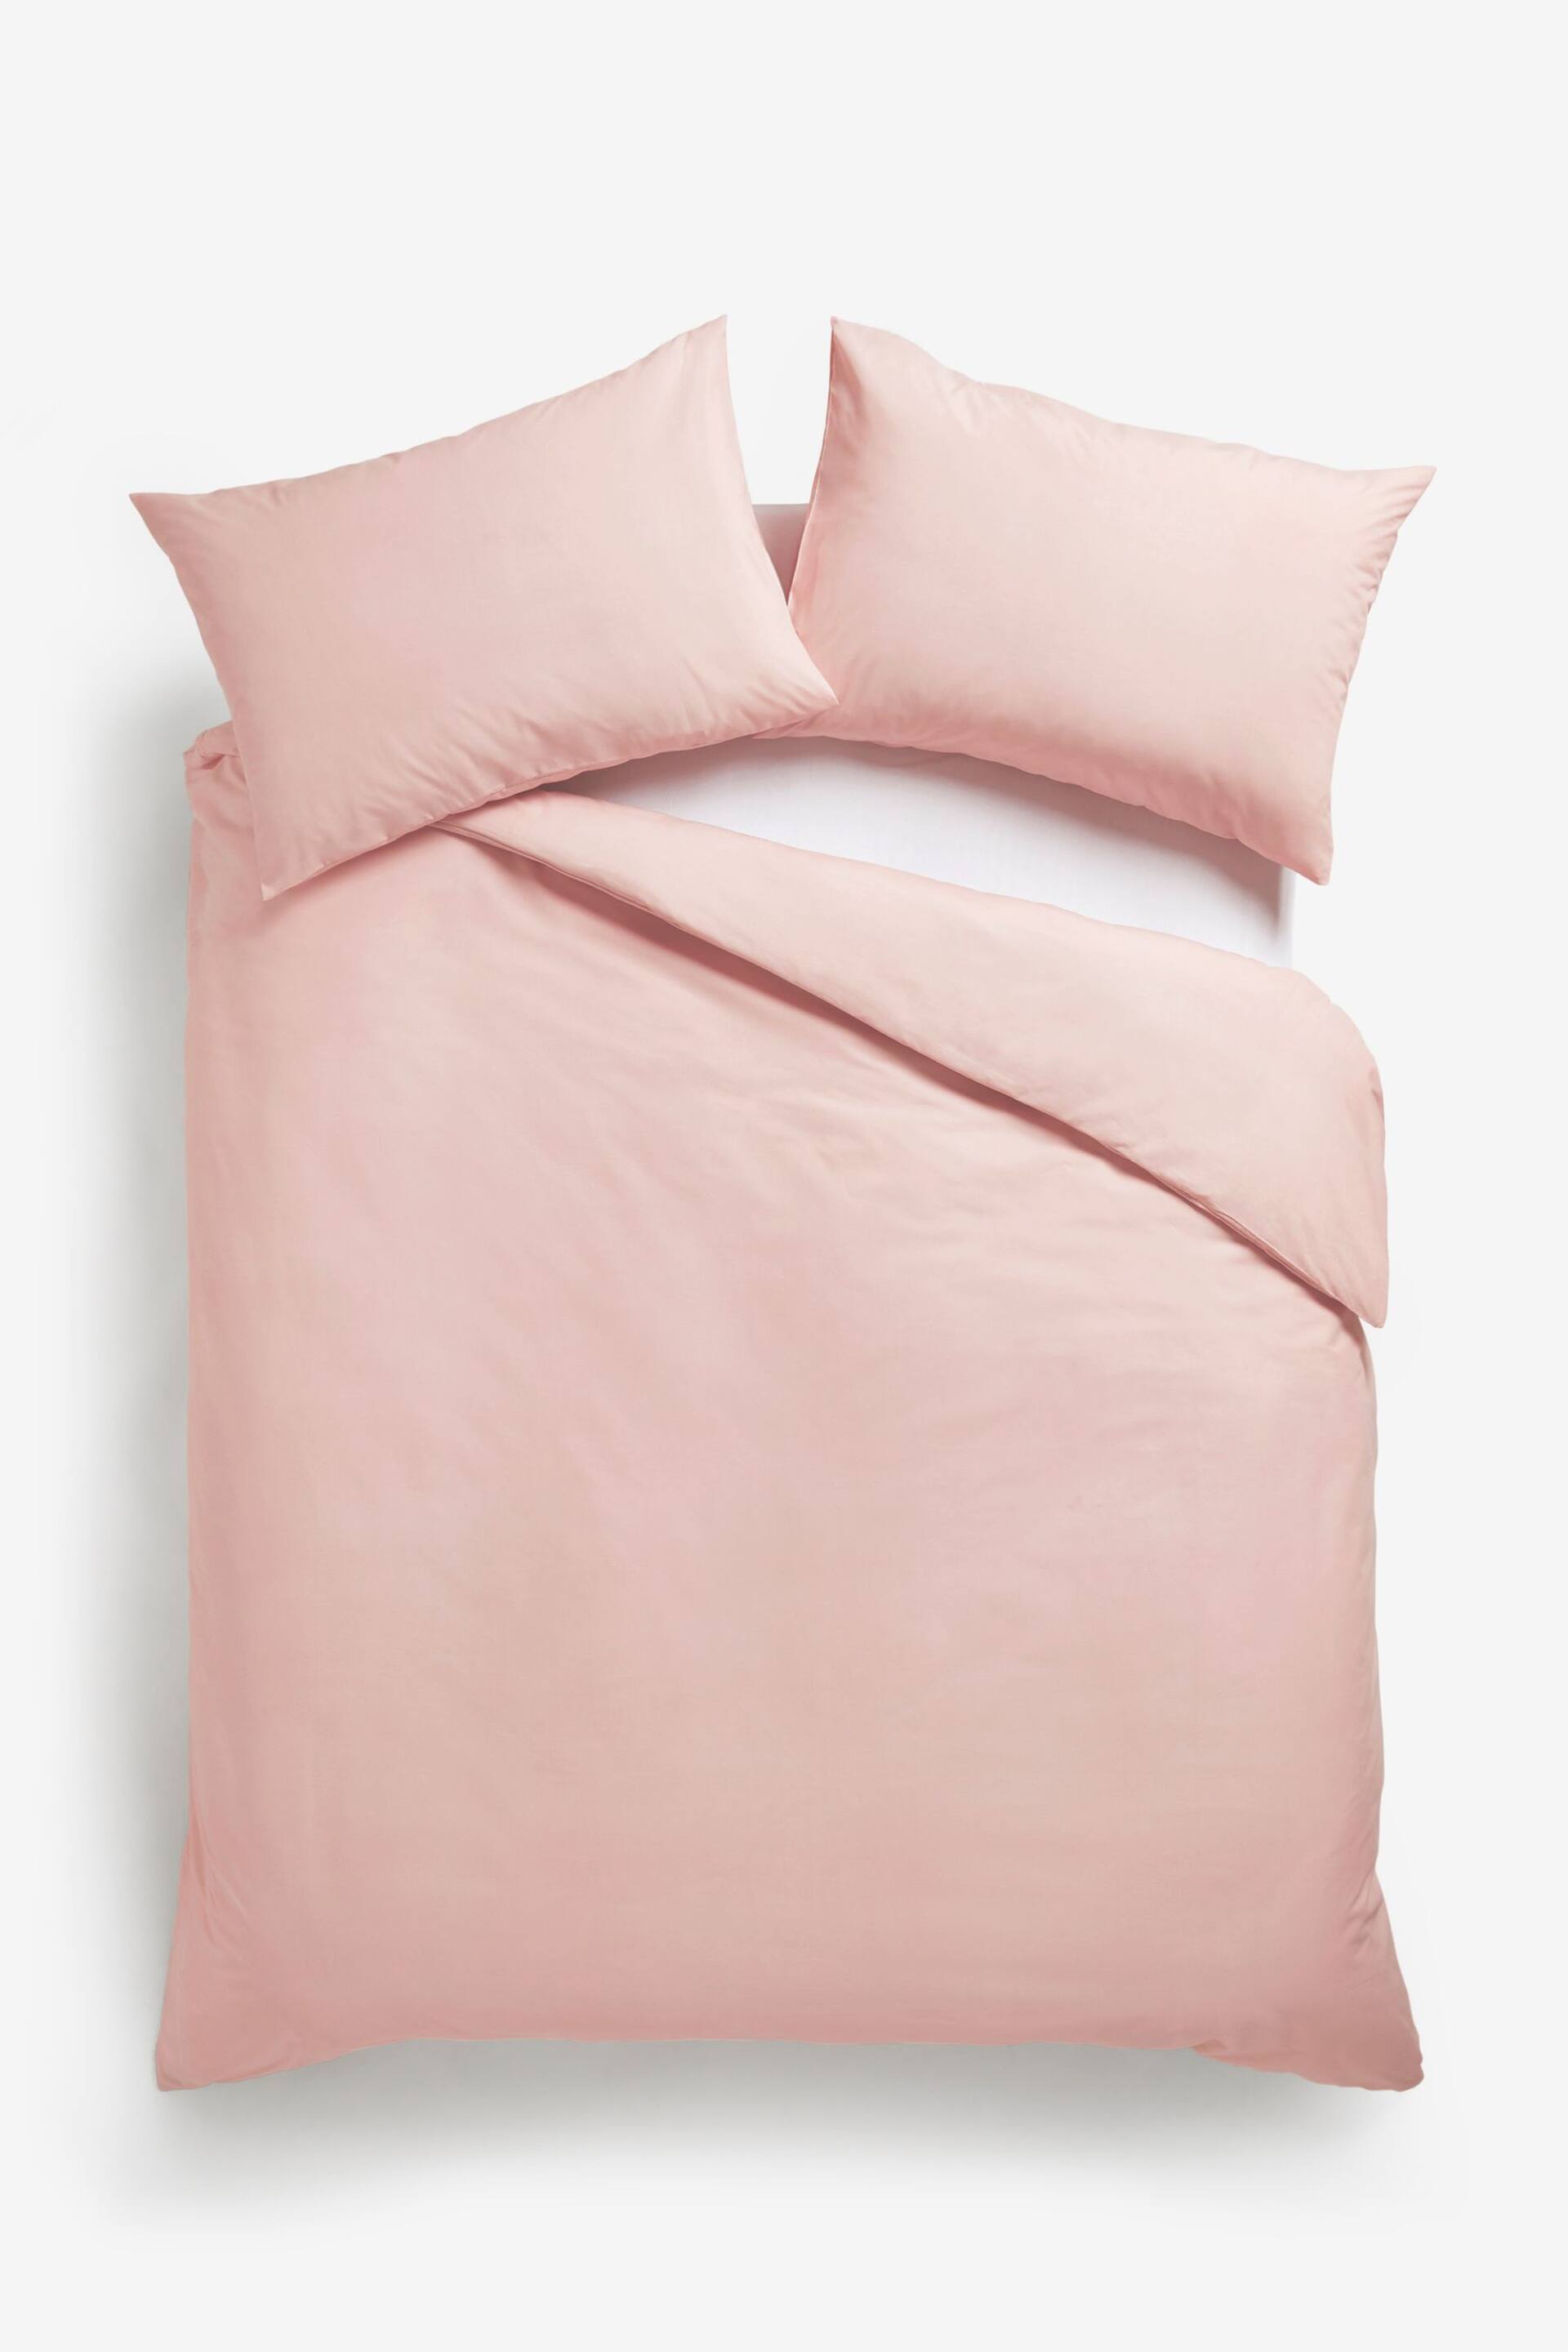 Pink Easy Care Polycotton Plain Duvet Cover and Pillowcase Set - Image 5 of 6